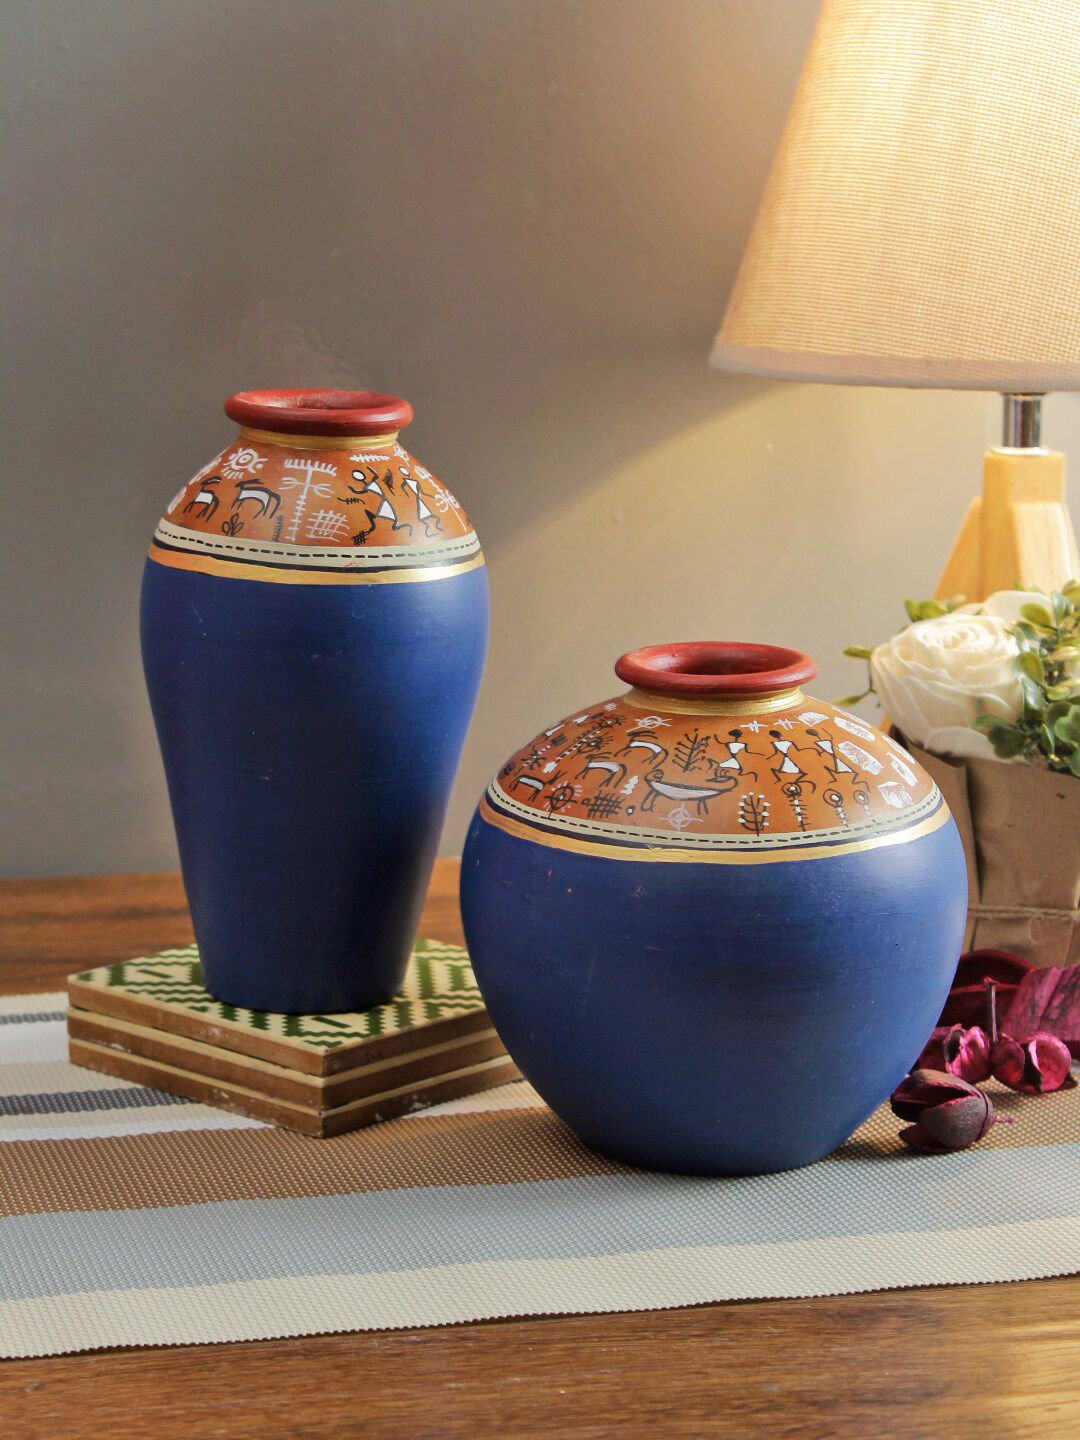 Aapno Rajasthan Set Of 2 Worli Style Hand-Painted Terracotta Vases Price in India